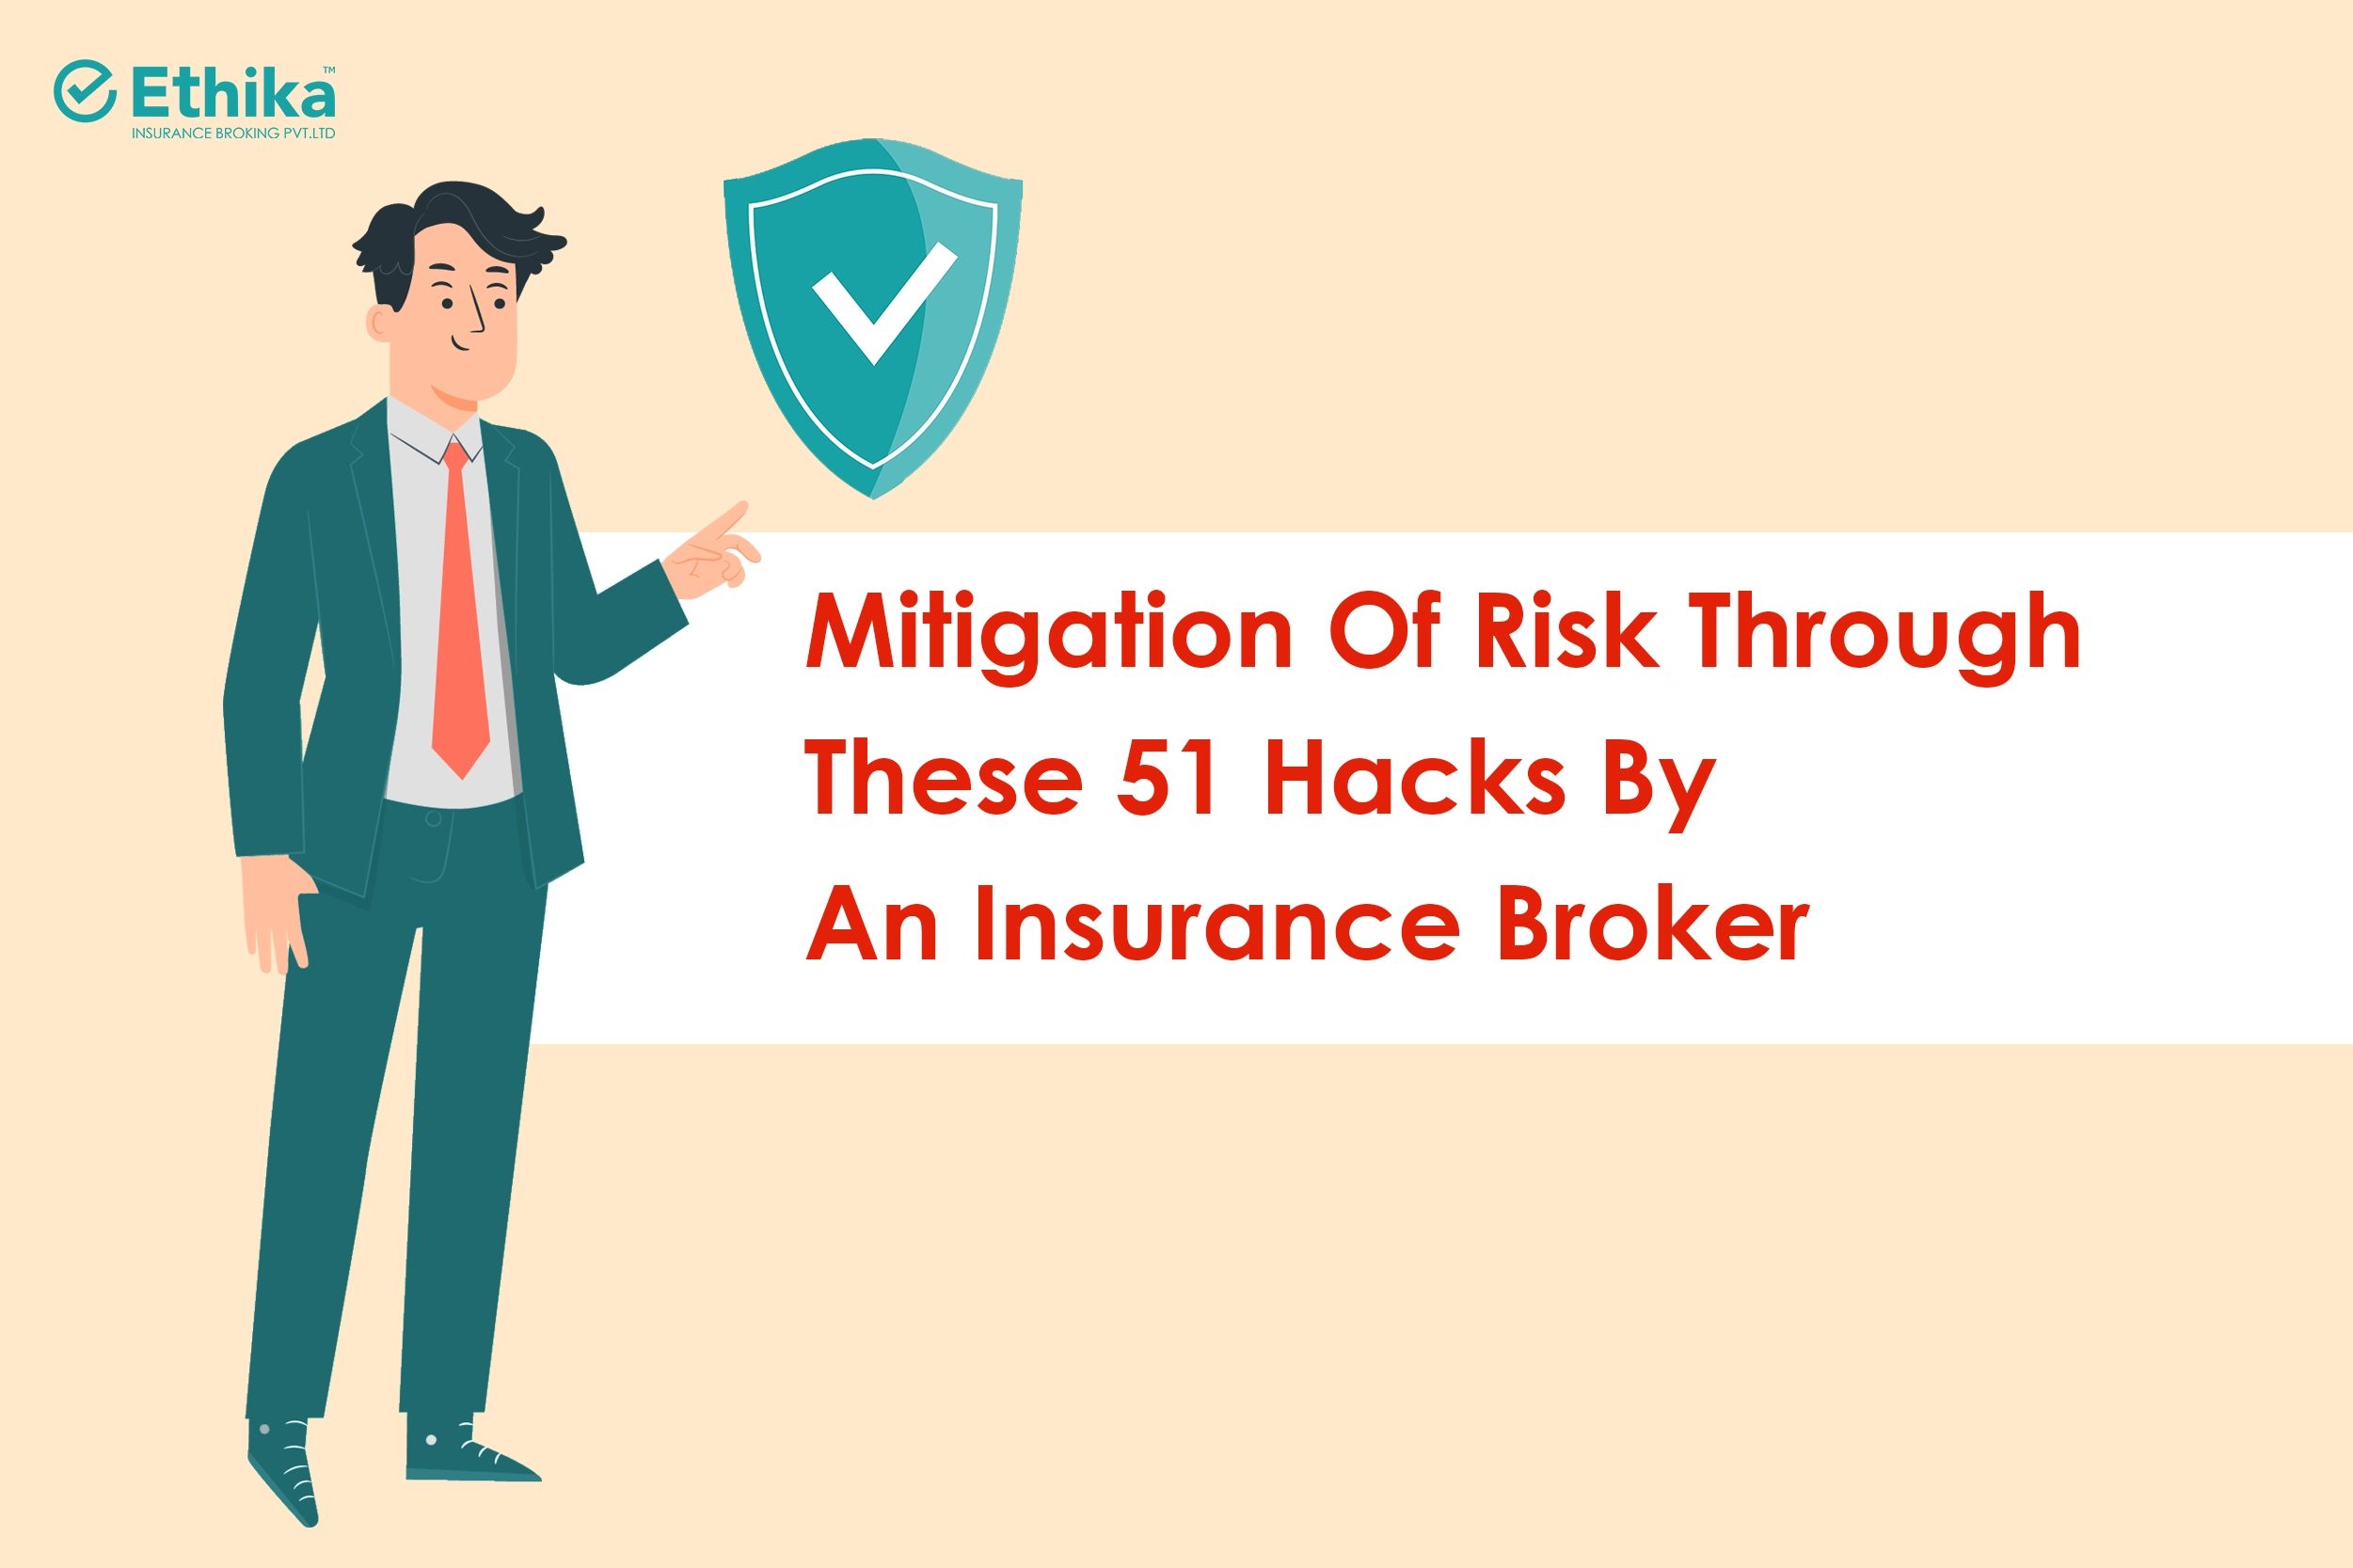 Mitigation Of Risk Through These 51 Hacks By An Insurance Broker